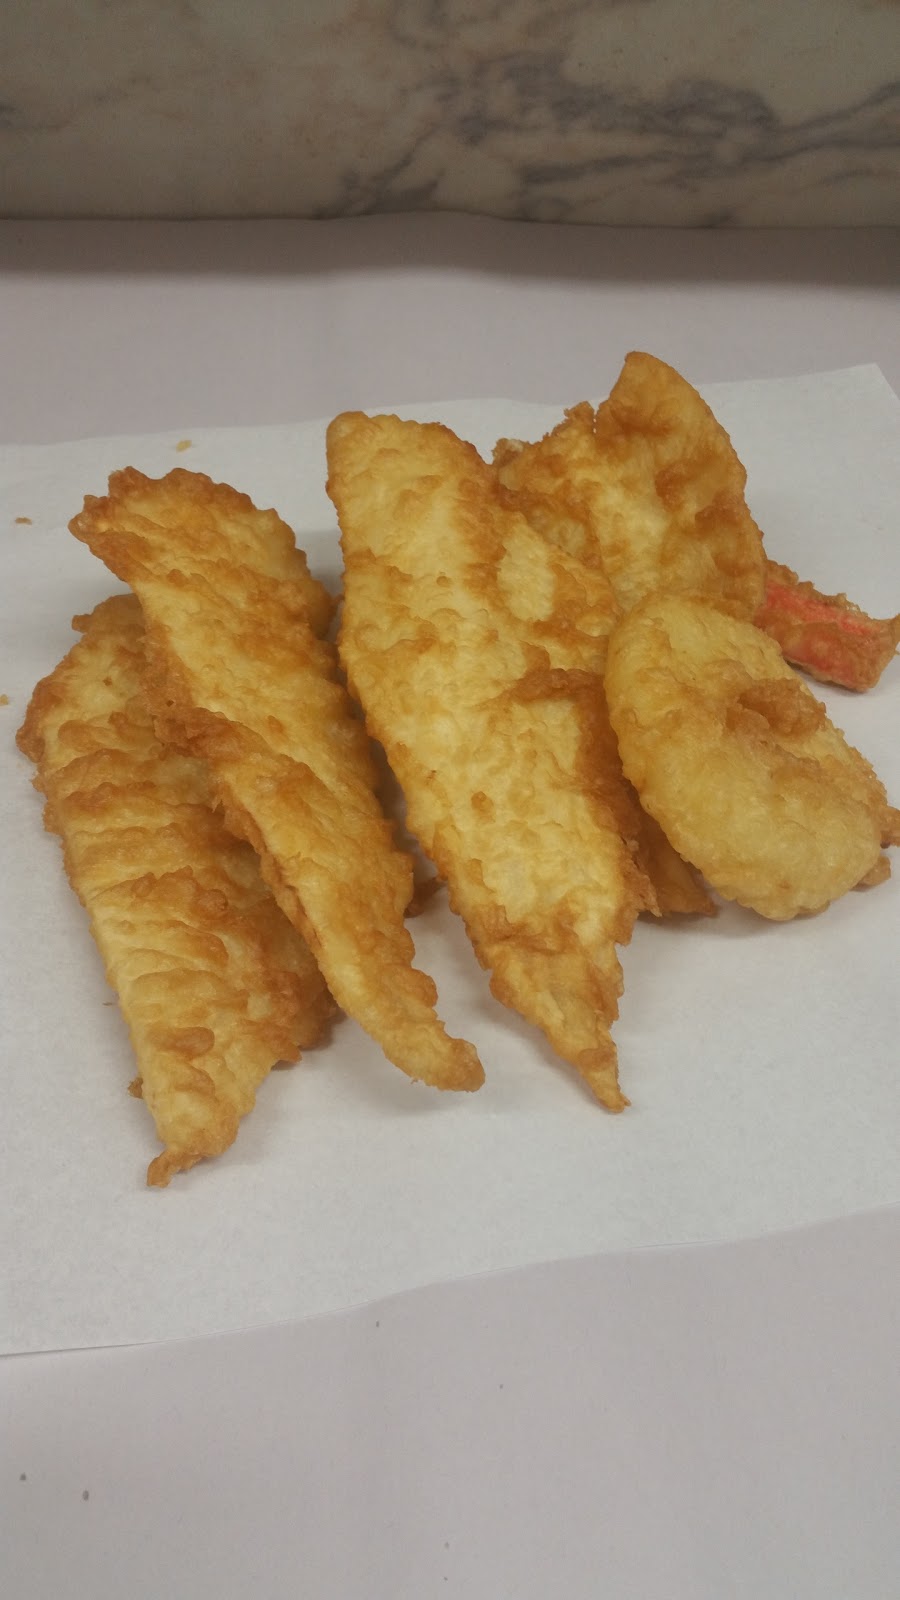 Darch Fish & Chips | restaurant | 225 Kingsway, Darch WA 6065, Australia | 0893022214 OR +61 8 9302 2214